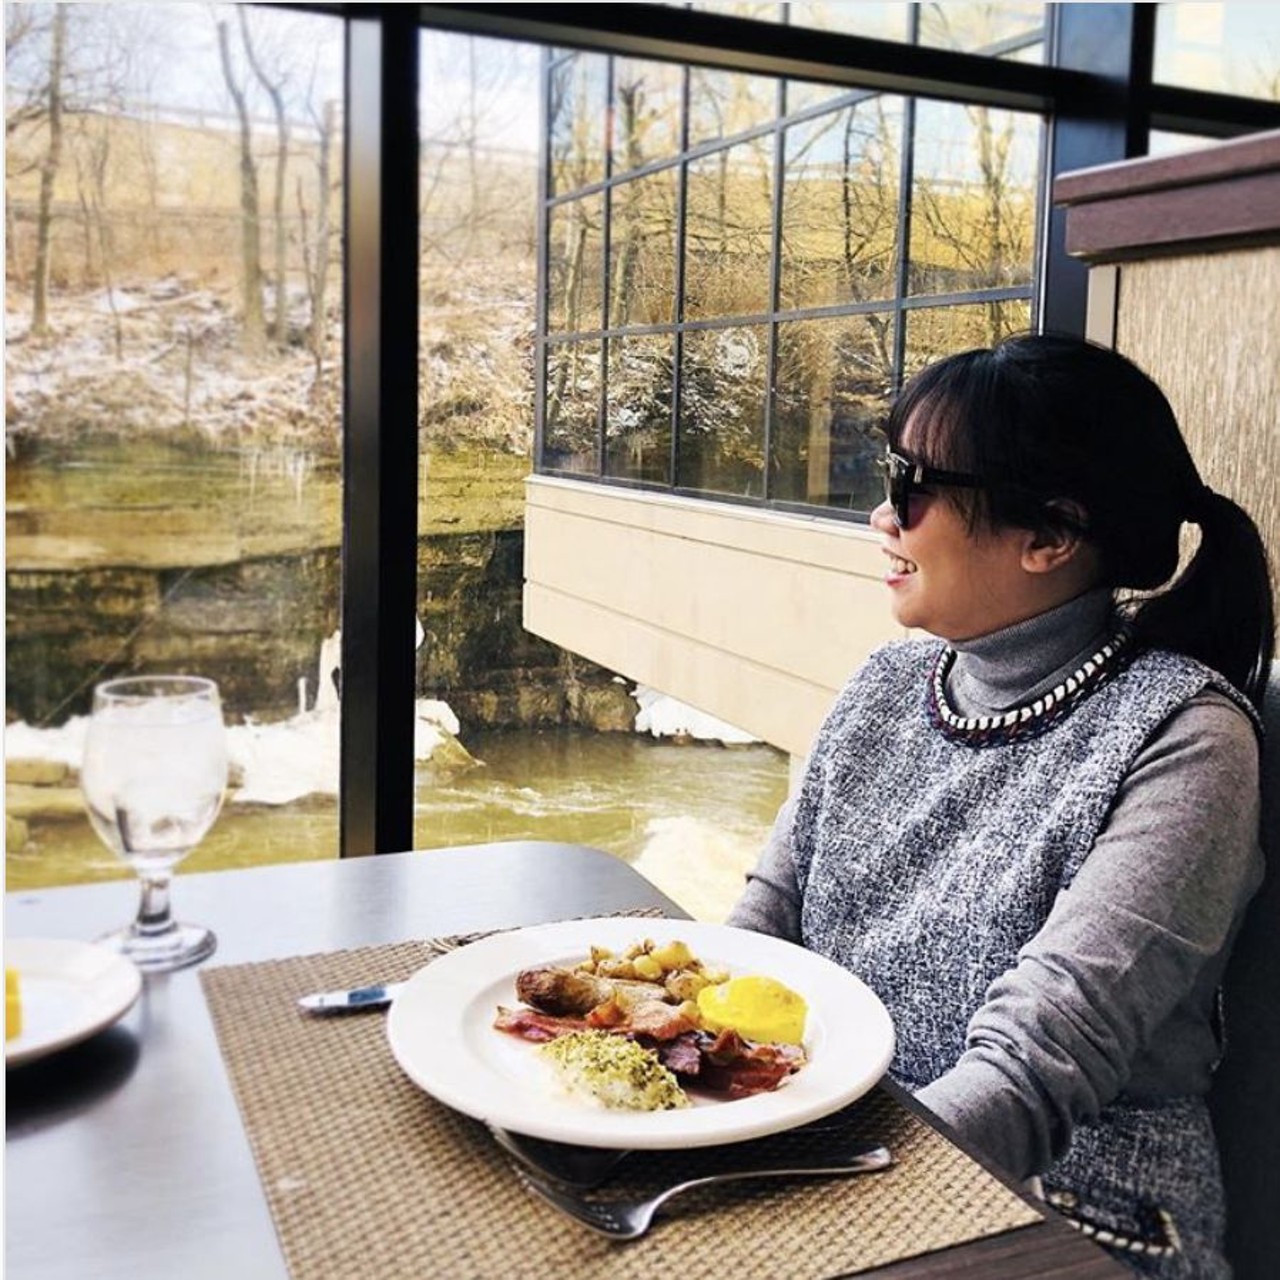 Beau&#146;s on the River
1989 Front Street, Cuyahoga Falls
Floor-to-ceiling windows give the dining room of this New American restaurant supreme views of the surrounding greenery. It&#146;ll feel like you&#146;re eating outside even when the Cleveland weather dips into arctic territory.
Photo via jirehceb/Instagram